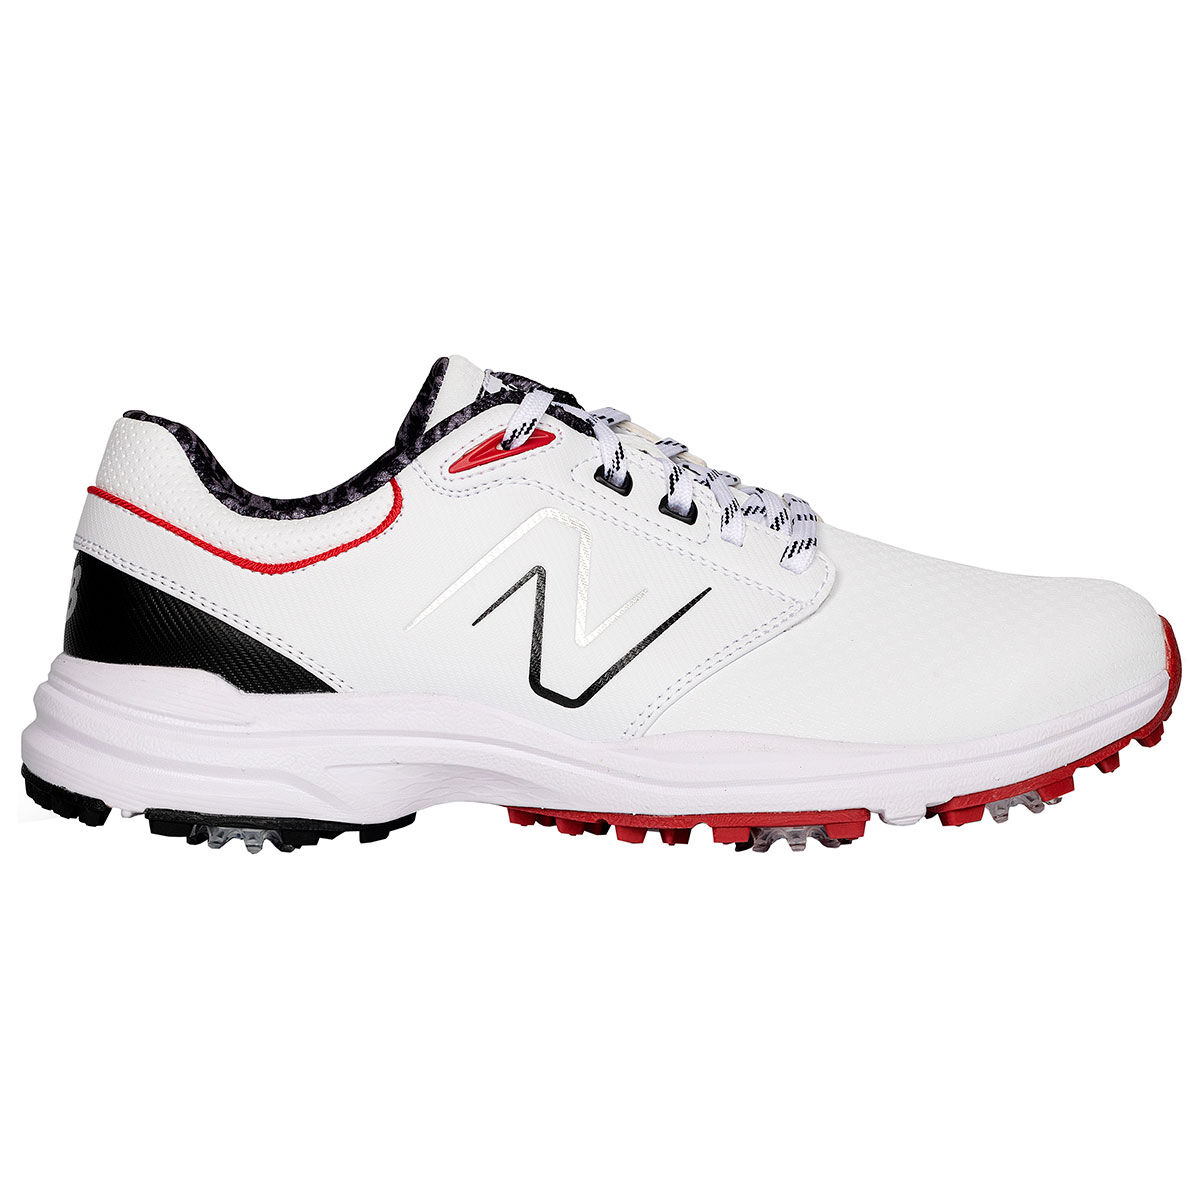 New Balance Men’s Brighton Waterproof Spiked Golf Shoes, Mens, White/red, 7 | American Golf